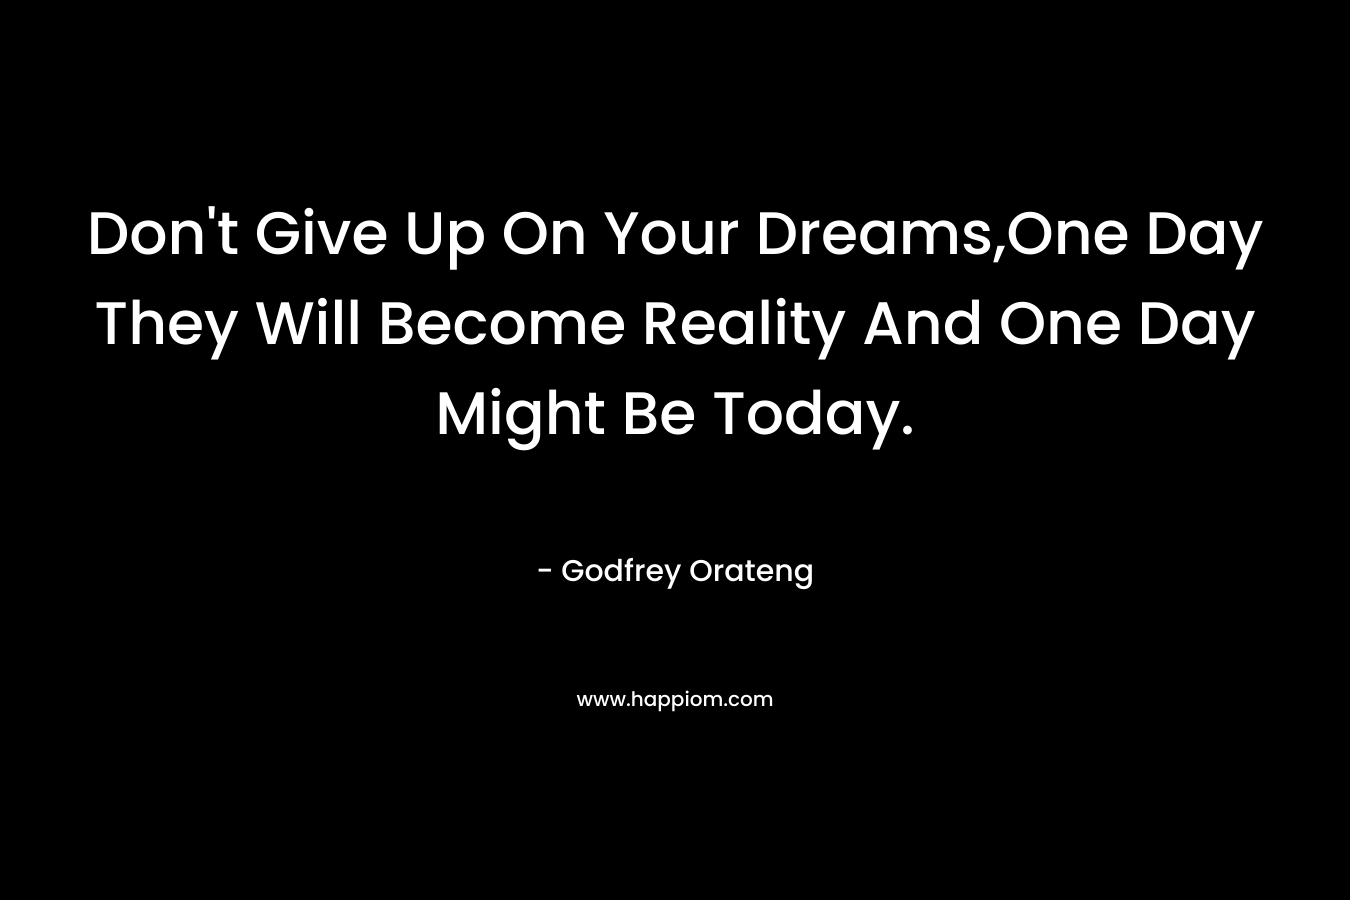 Don't Give Up On Your Dreams,One Day They Will Become Reality And One Day Might Be Today.